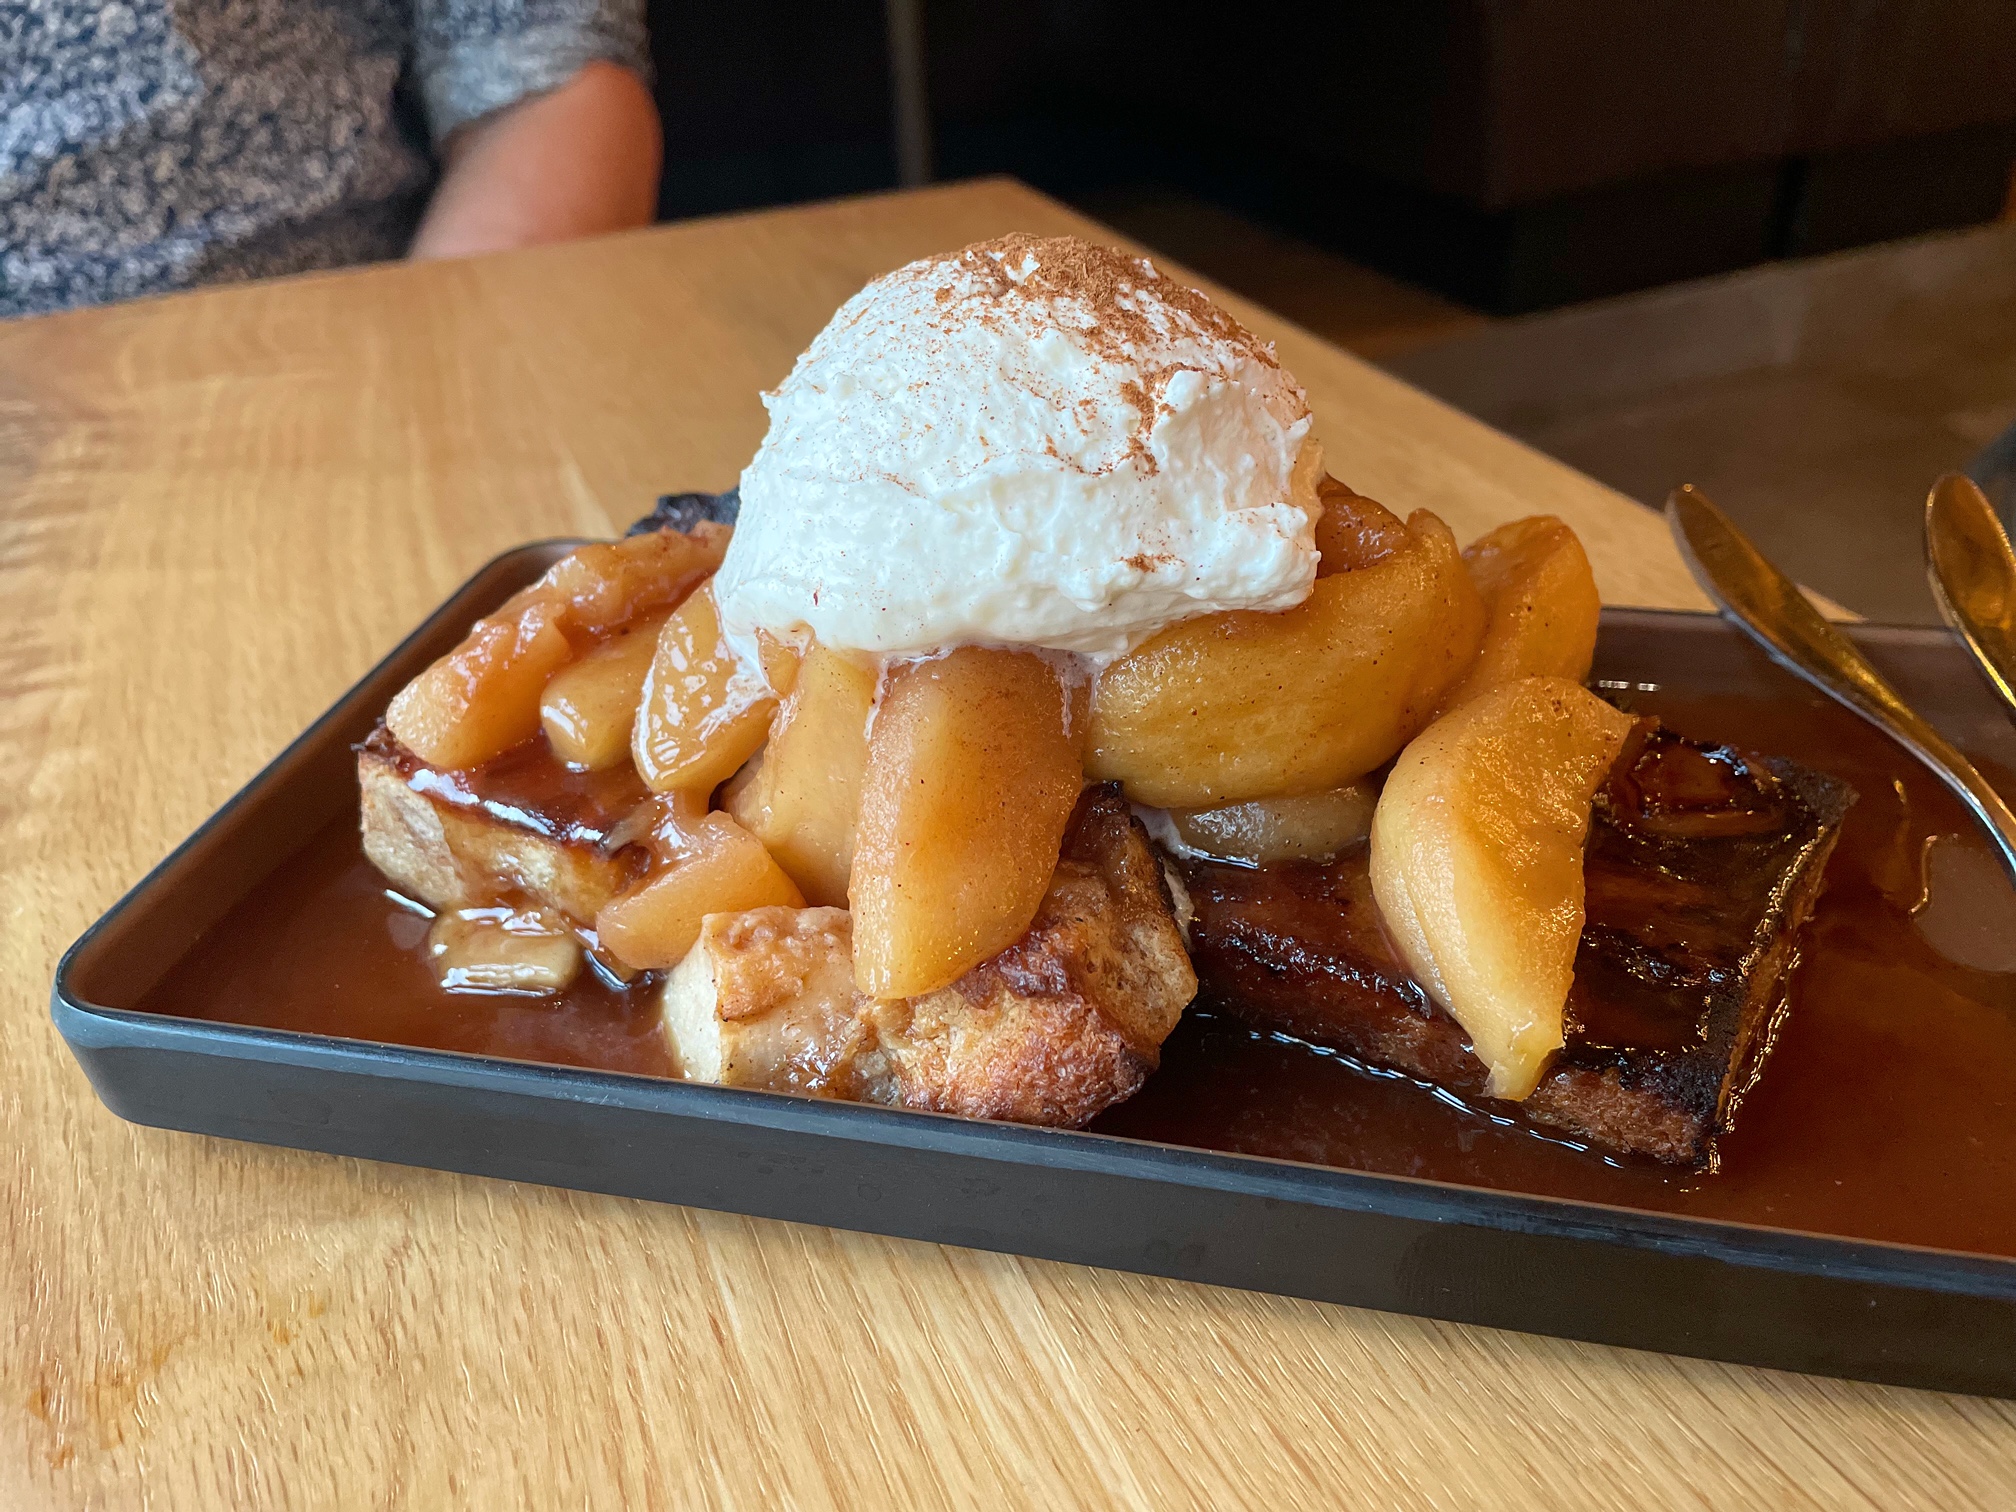 On a wooden table, there is a dessert with apples, bread, and a big scoop of a cream topping. Photo by Alyssa Buckley.